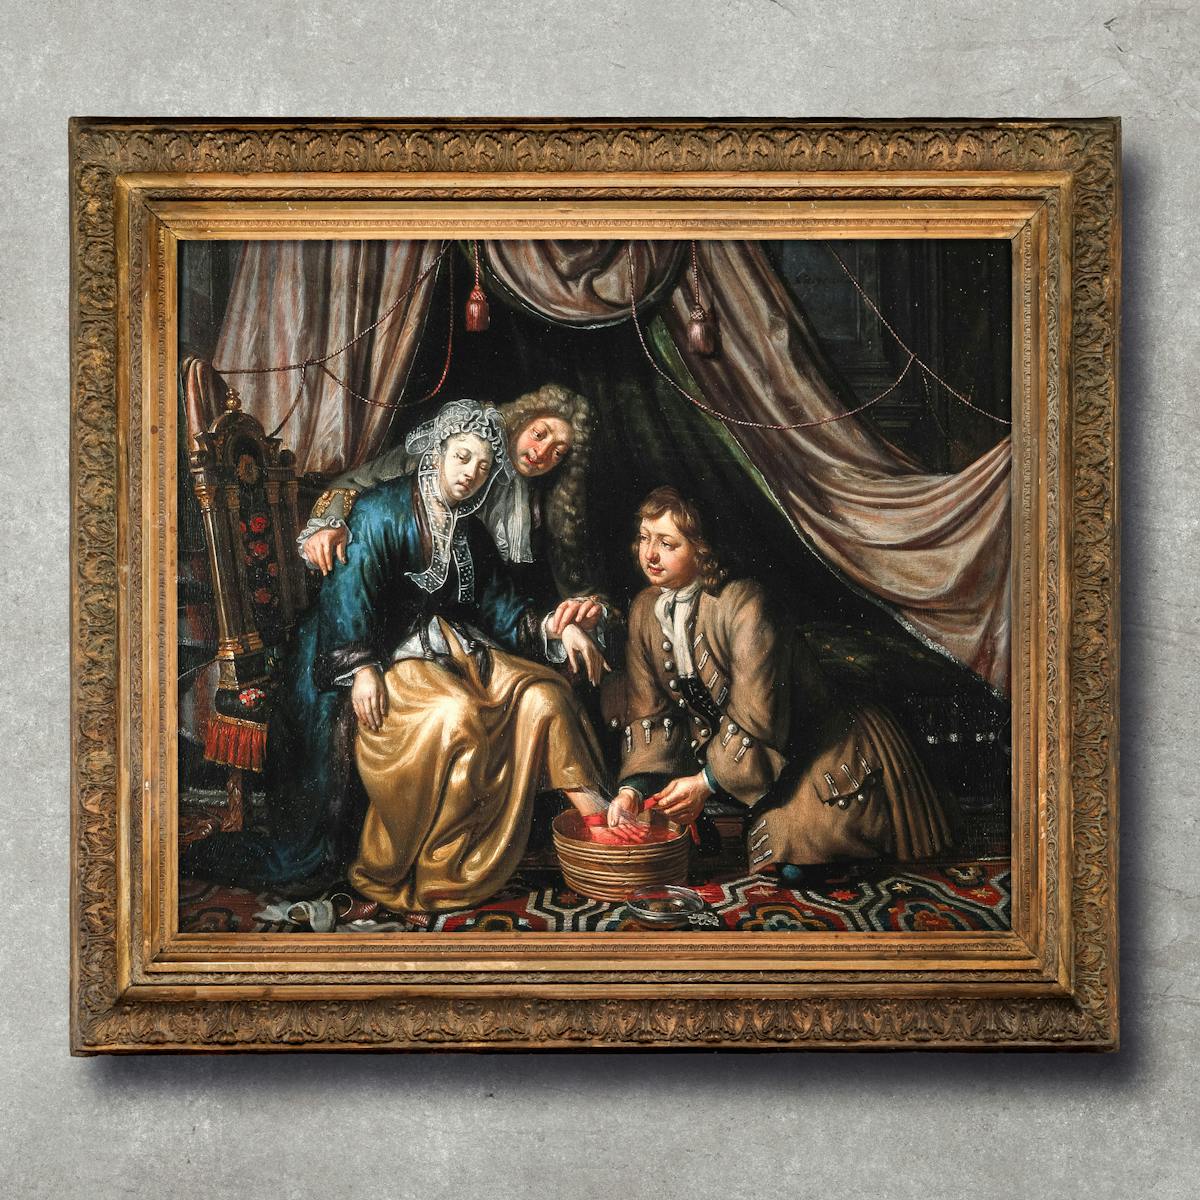 A photograph of an 18th century oil painting in a rusted gold metal frame displayed on a marble grey background. 

A woman patient, looking very pale, sits on a chair, left. Behind her, a doctor, wearing a wig, leans over her to take the pulse of her left hand with his left hand. Her left foot is placed in a tub of water and a young surgeon, kneeling on the right, lets blood from her left foot while holding a tourniquet around her ankle. The woman is obviously wealthy from her surroundings. She sits on an elaborately embroidered chair, a luxurious carpet covers the floor and silken drapes hang over her bed